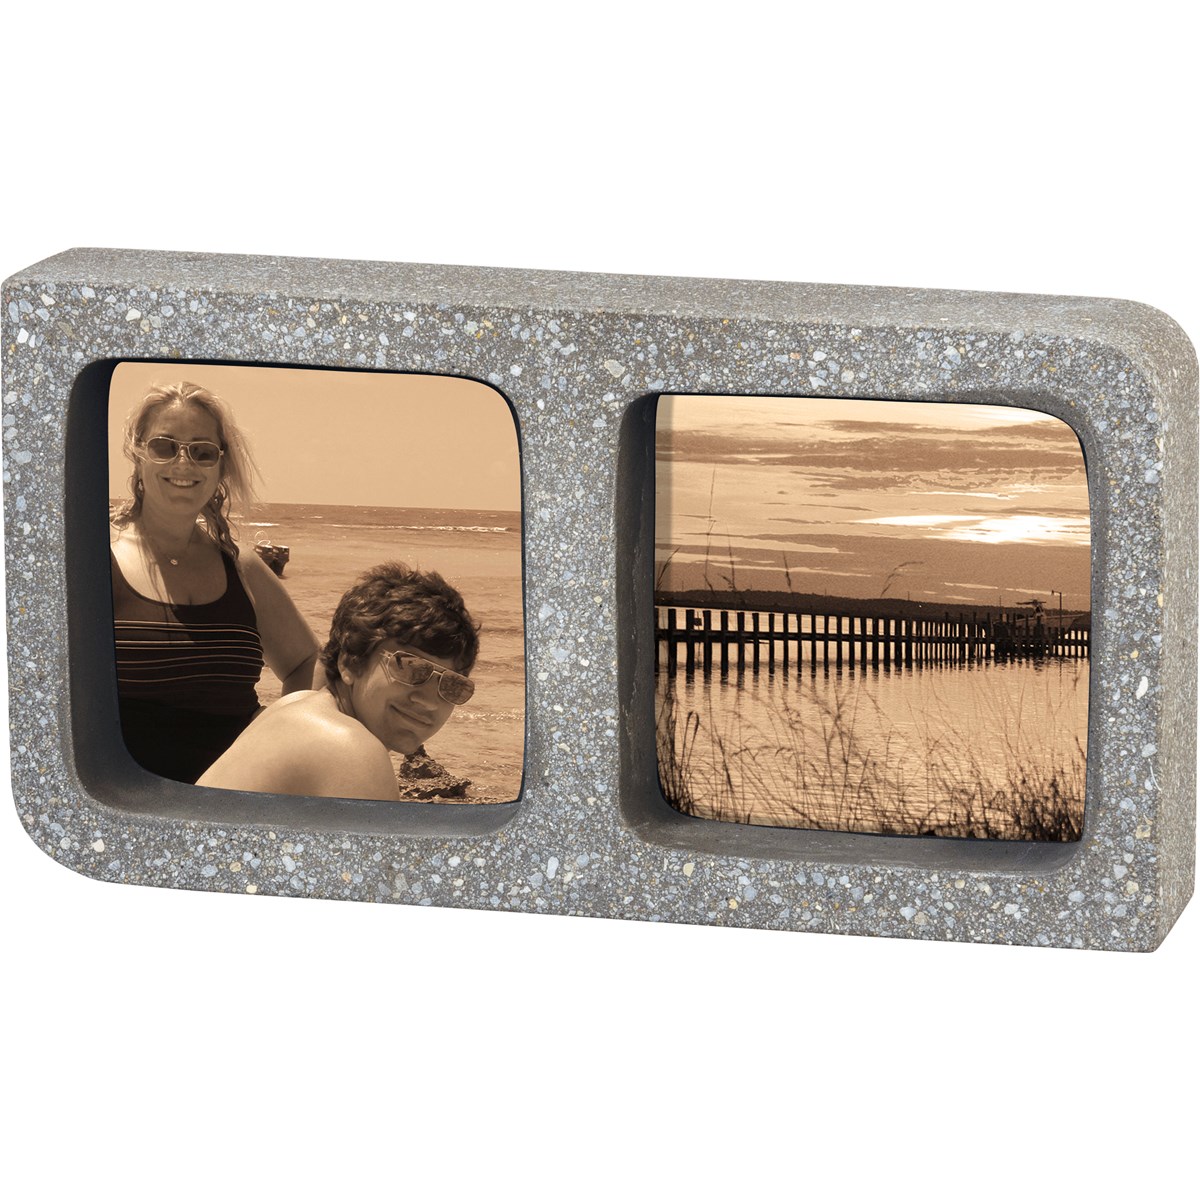 Frame - Double Gray  - 9" x 4.75" x 1.75", Fits 3.50" x 3.50" Photos - Cement